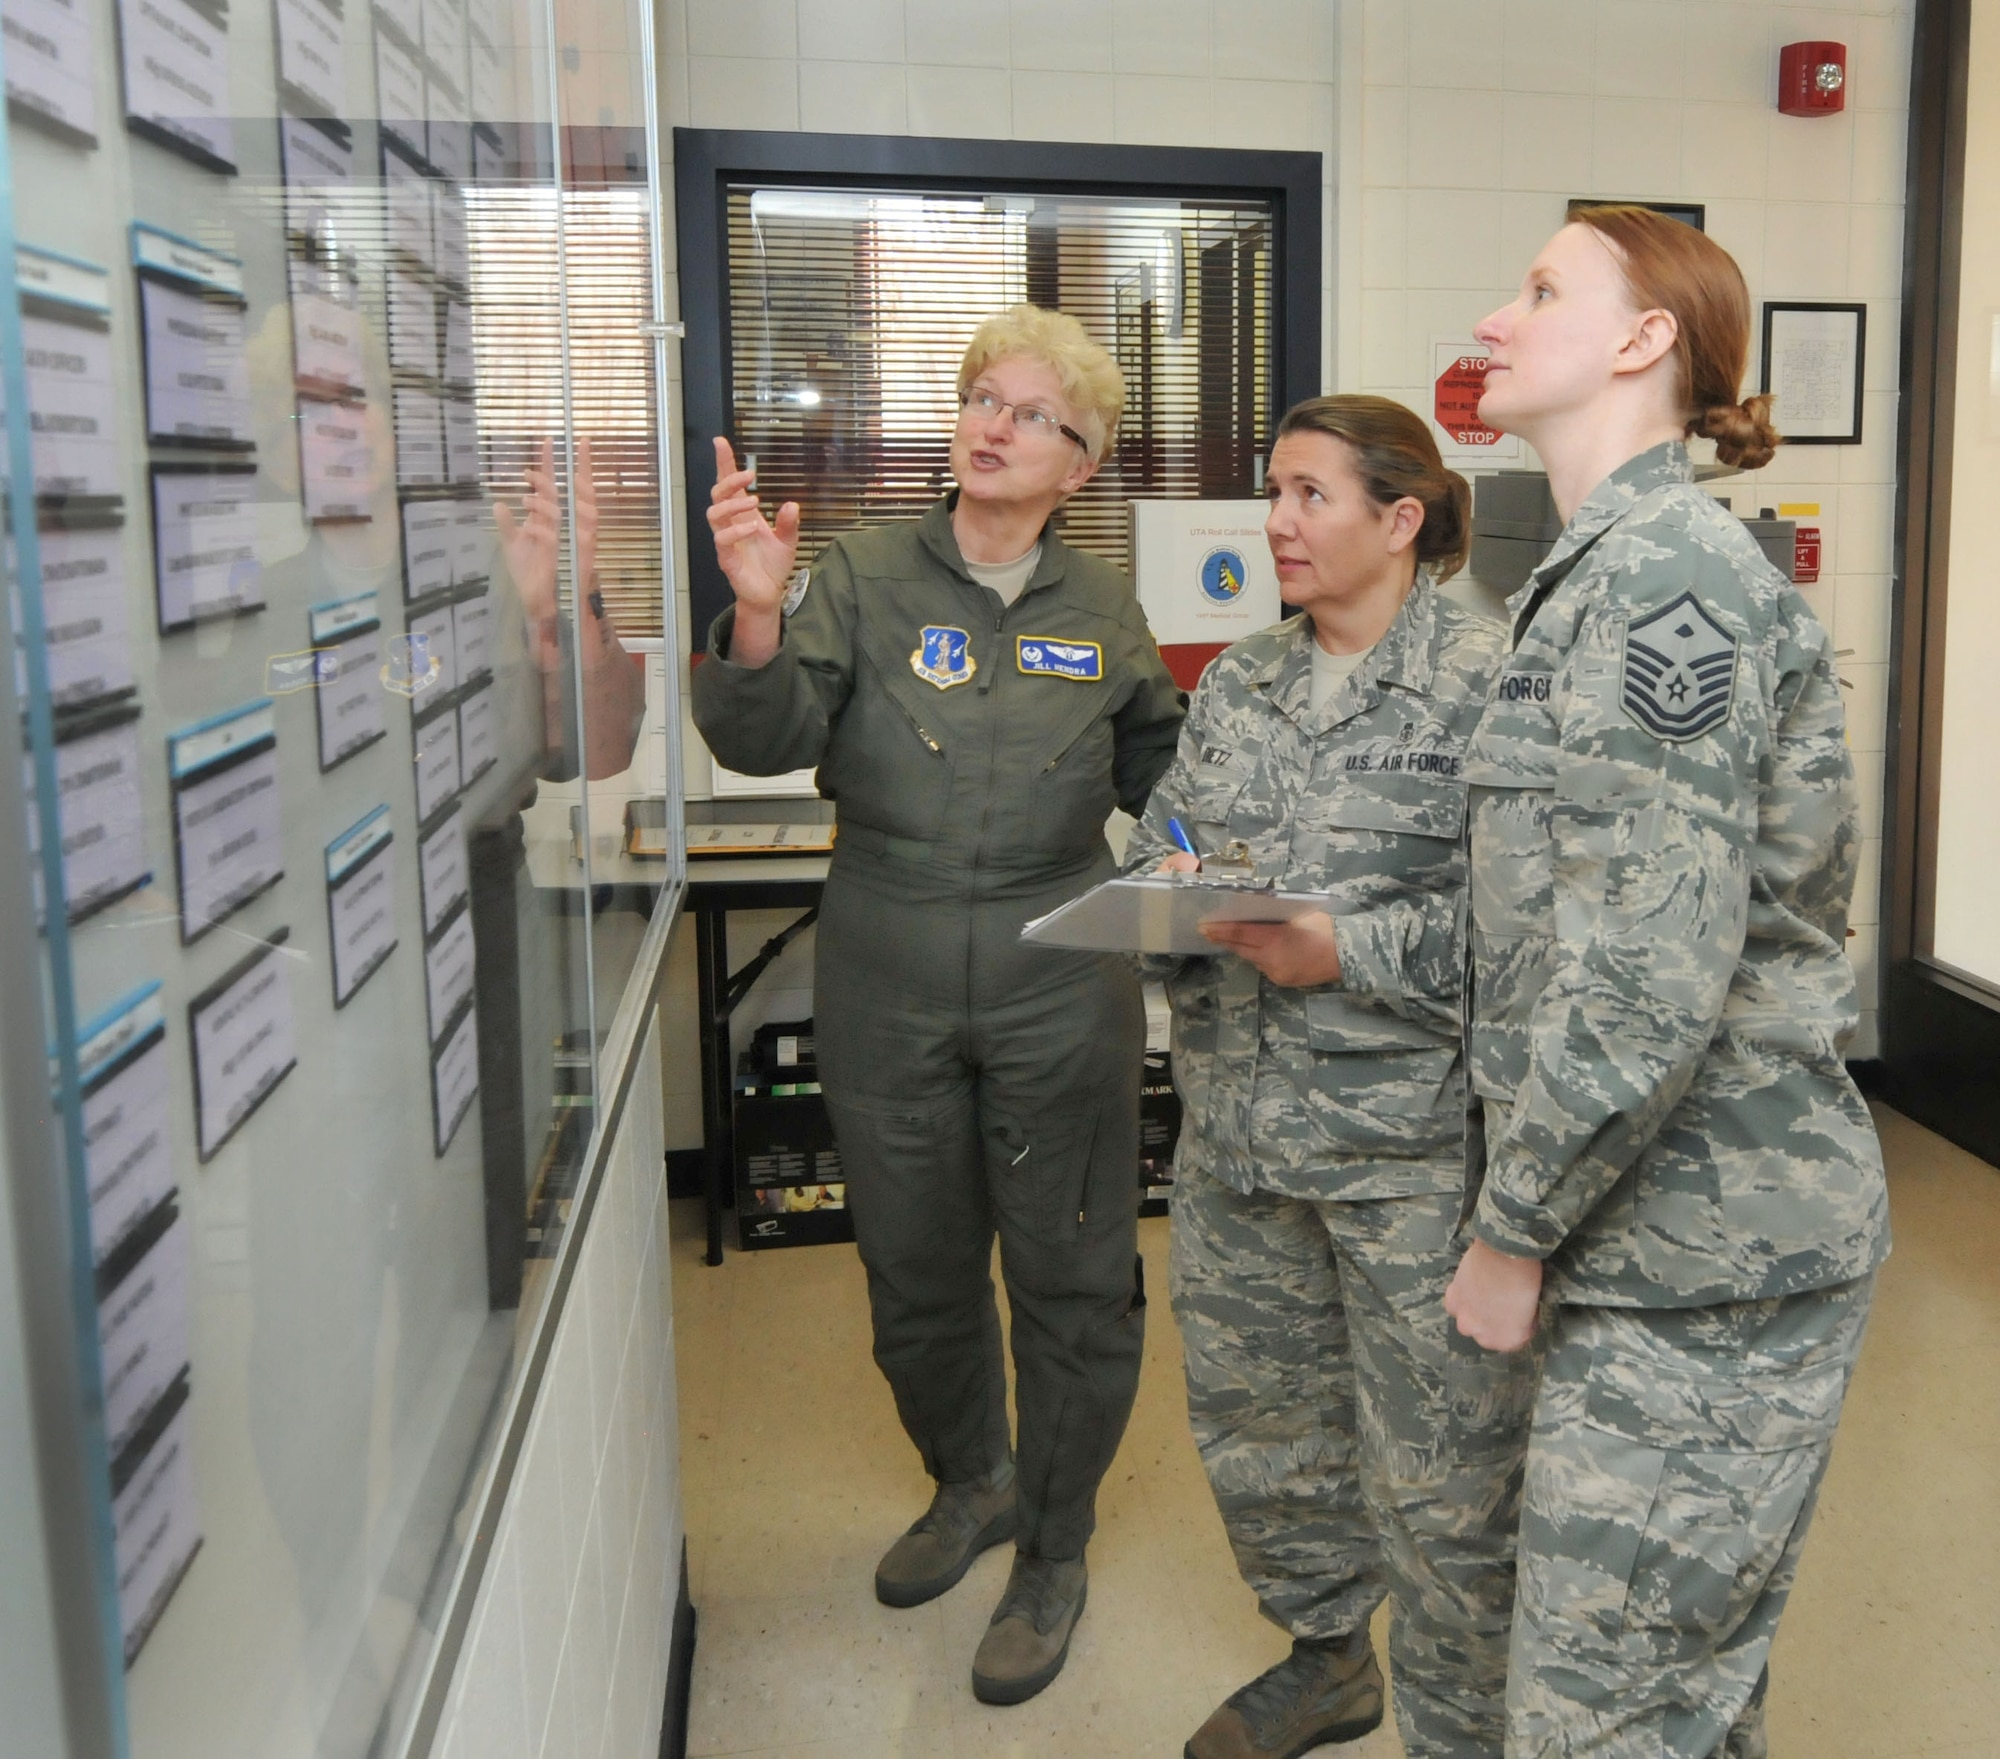 U.S. Air Force Master Sgt. Maria Gupton, first female 1st Shirt for the 145th Medical Group, Chief Master Sgt. Susan Dietz, first female Chief Enlisted Manager, 145th MDG and Col. Jill Hendra, first female commander 145th MDG, coordinate manning of personnel and plan training schedule prior to upcoming “Superdrill” Unit Training Assembly at the North Carolina Air National Guard base, Charlotte-Douglas Intl. airport, Jan. 8, 2014.  January UTA will be Hendra’s final drill as commander of the 145th MDG. (Air National Guard photo by Master Sgt. Patricia F. Moran/Released)